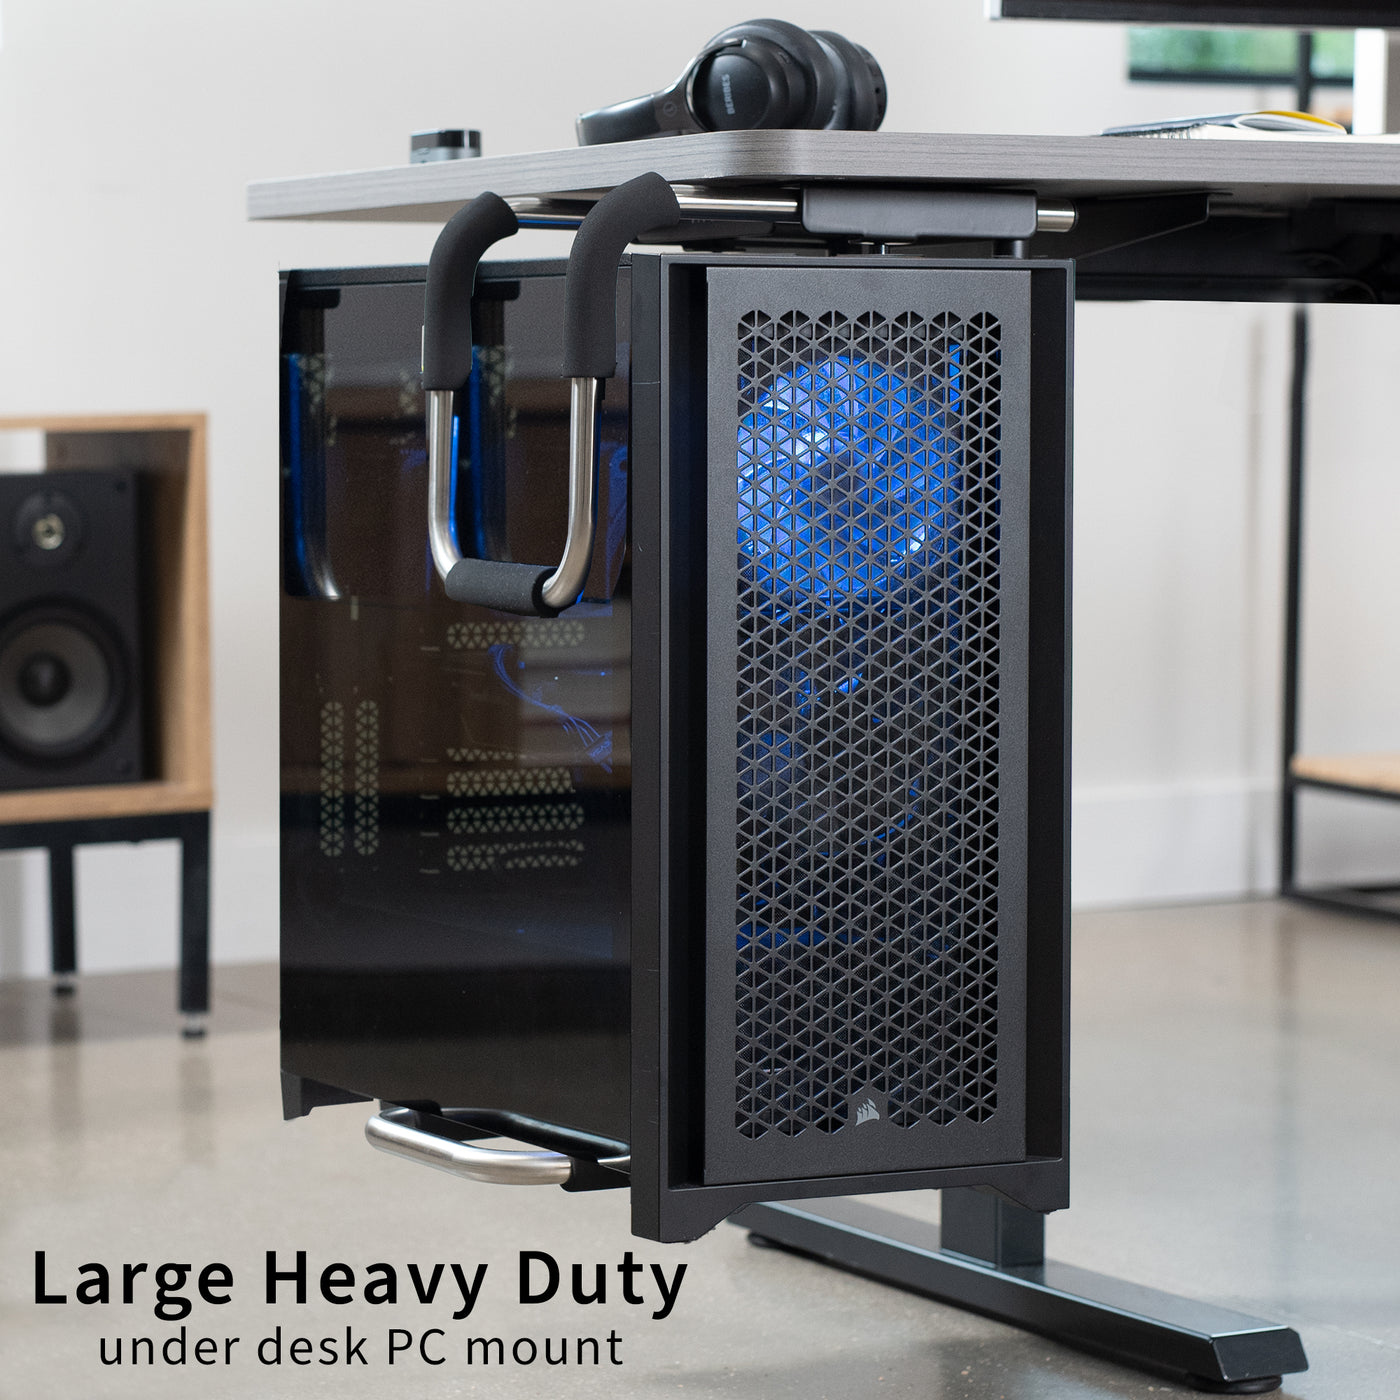 Large heavy-duty height adjustable and width adjustable under desk PC mount.